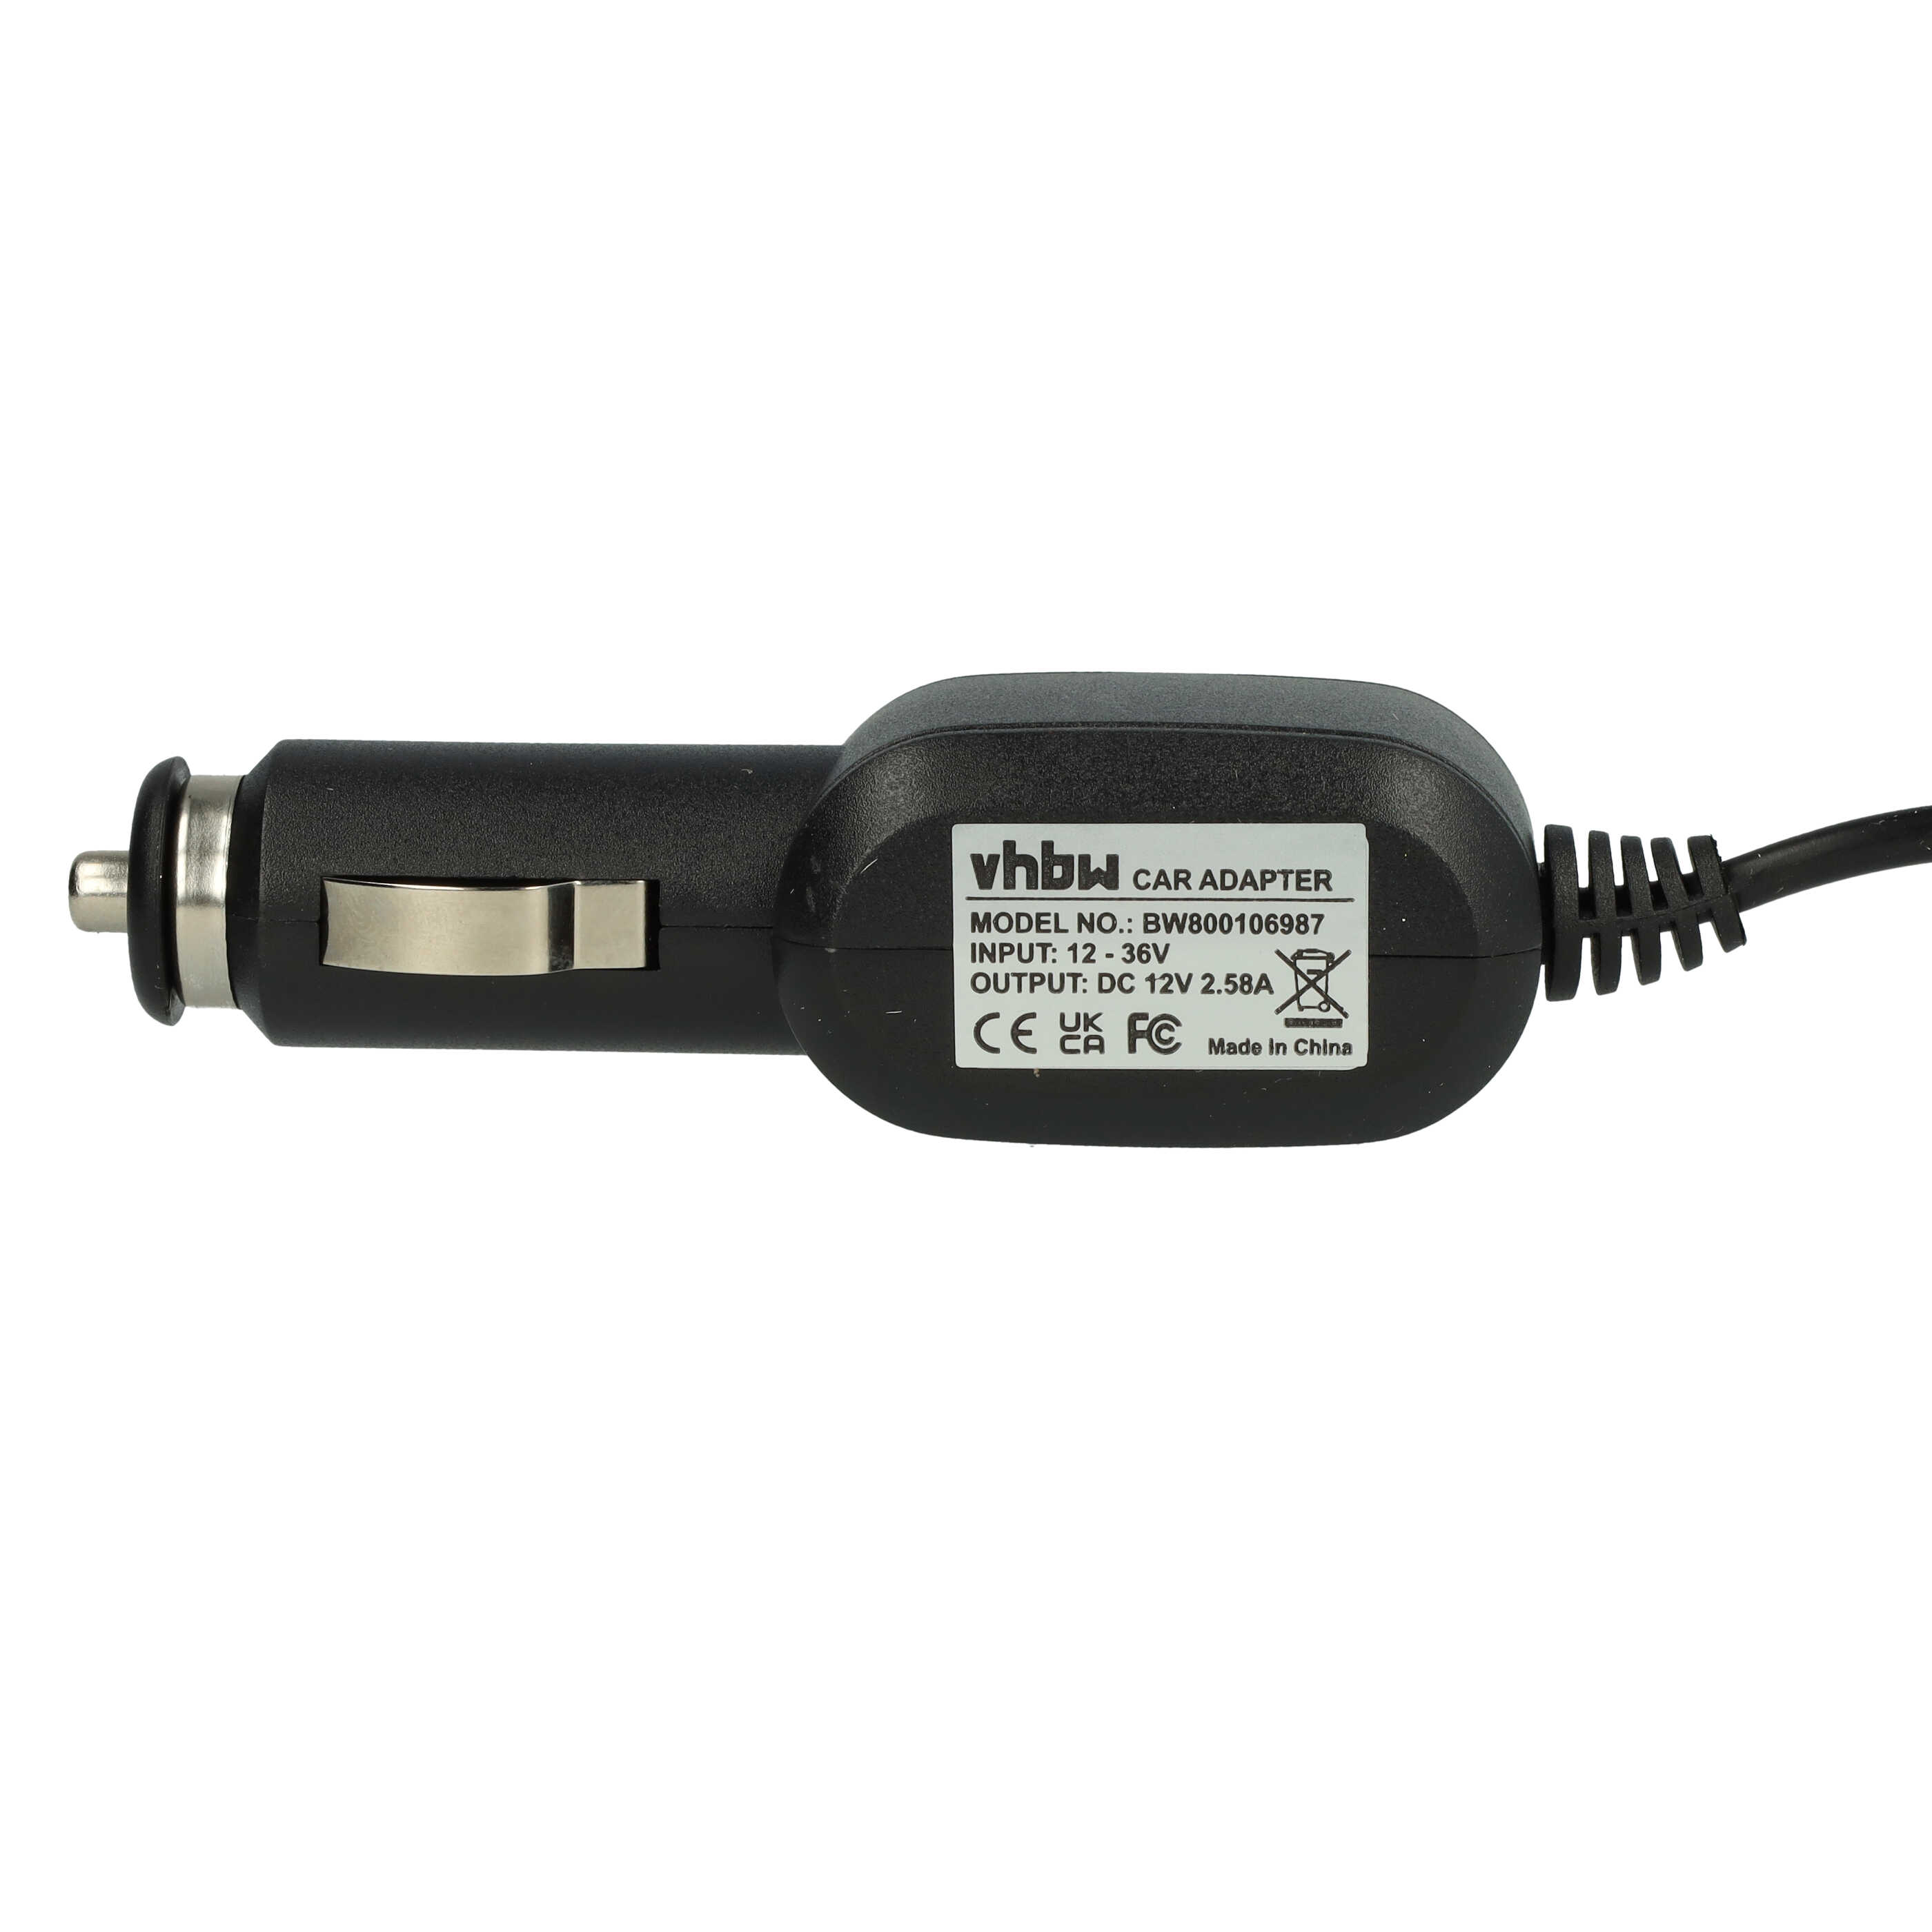 In-Car Cable replaces Microsoft 1706, 1735, 1736, 1800 for MicrosoftTablet - 12 V In-Vehicle Charger